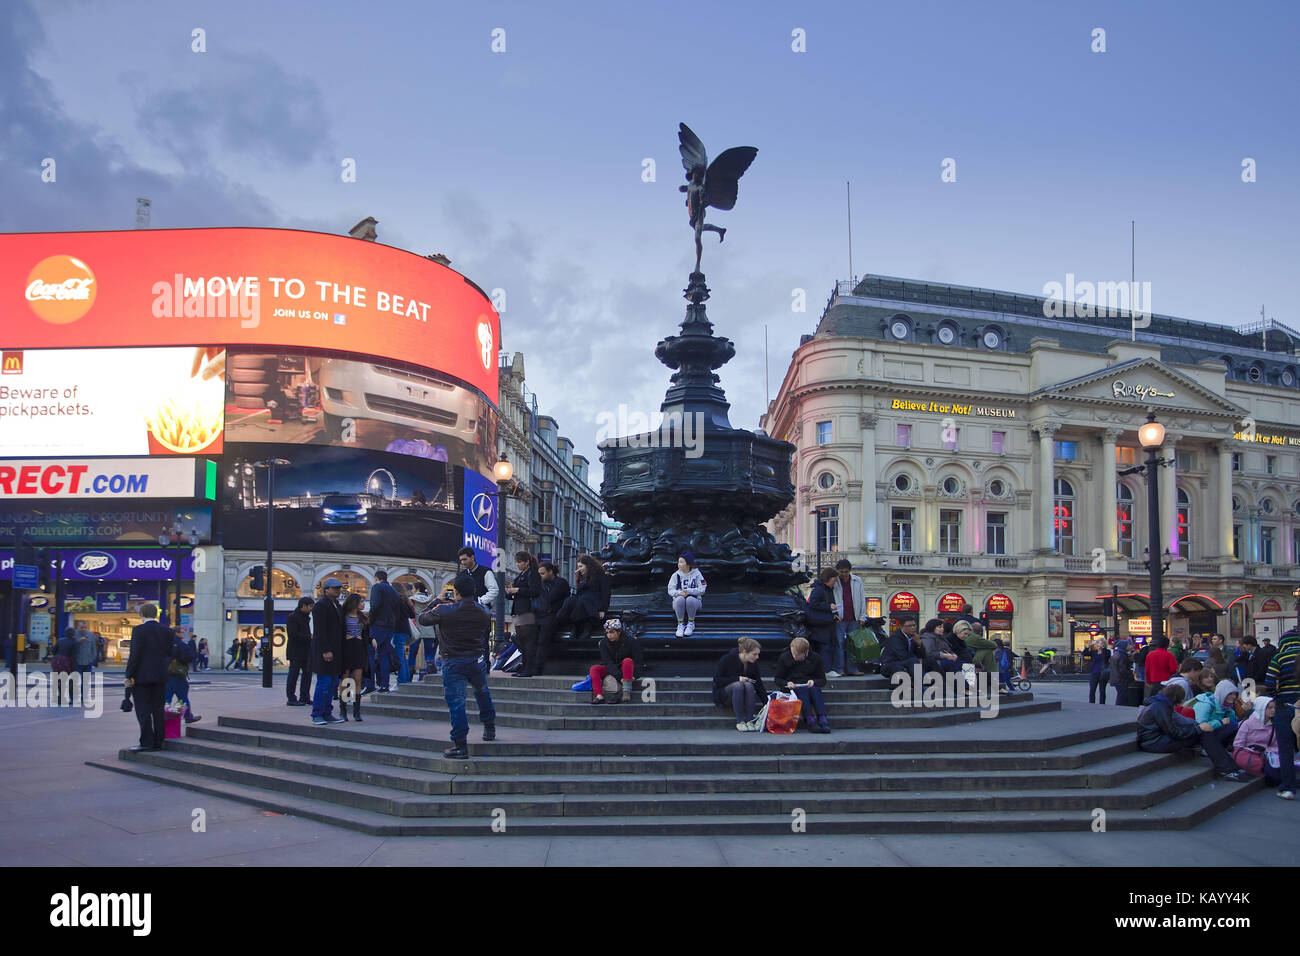 Great Britain, London, Piccadilly Circus, in the evening, Stock Photo